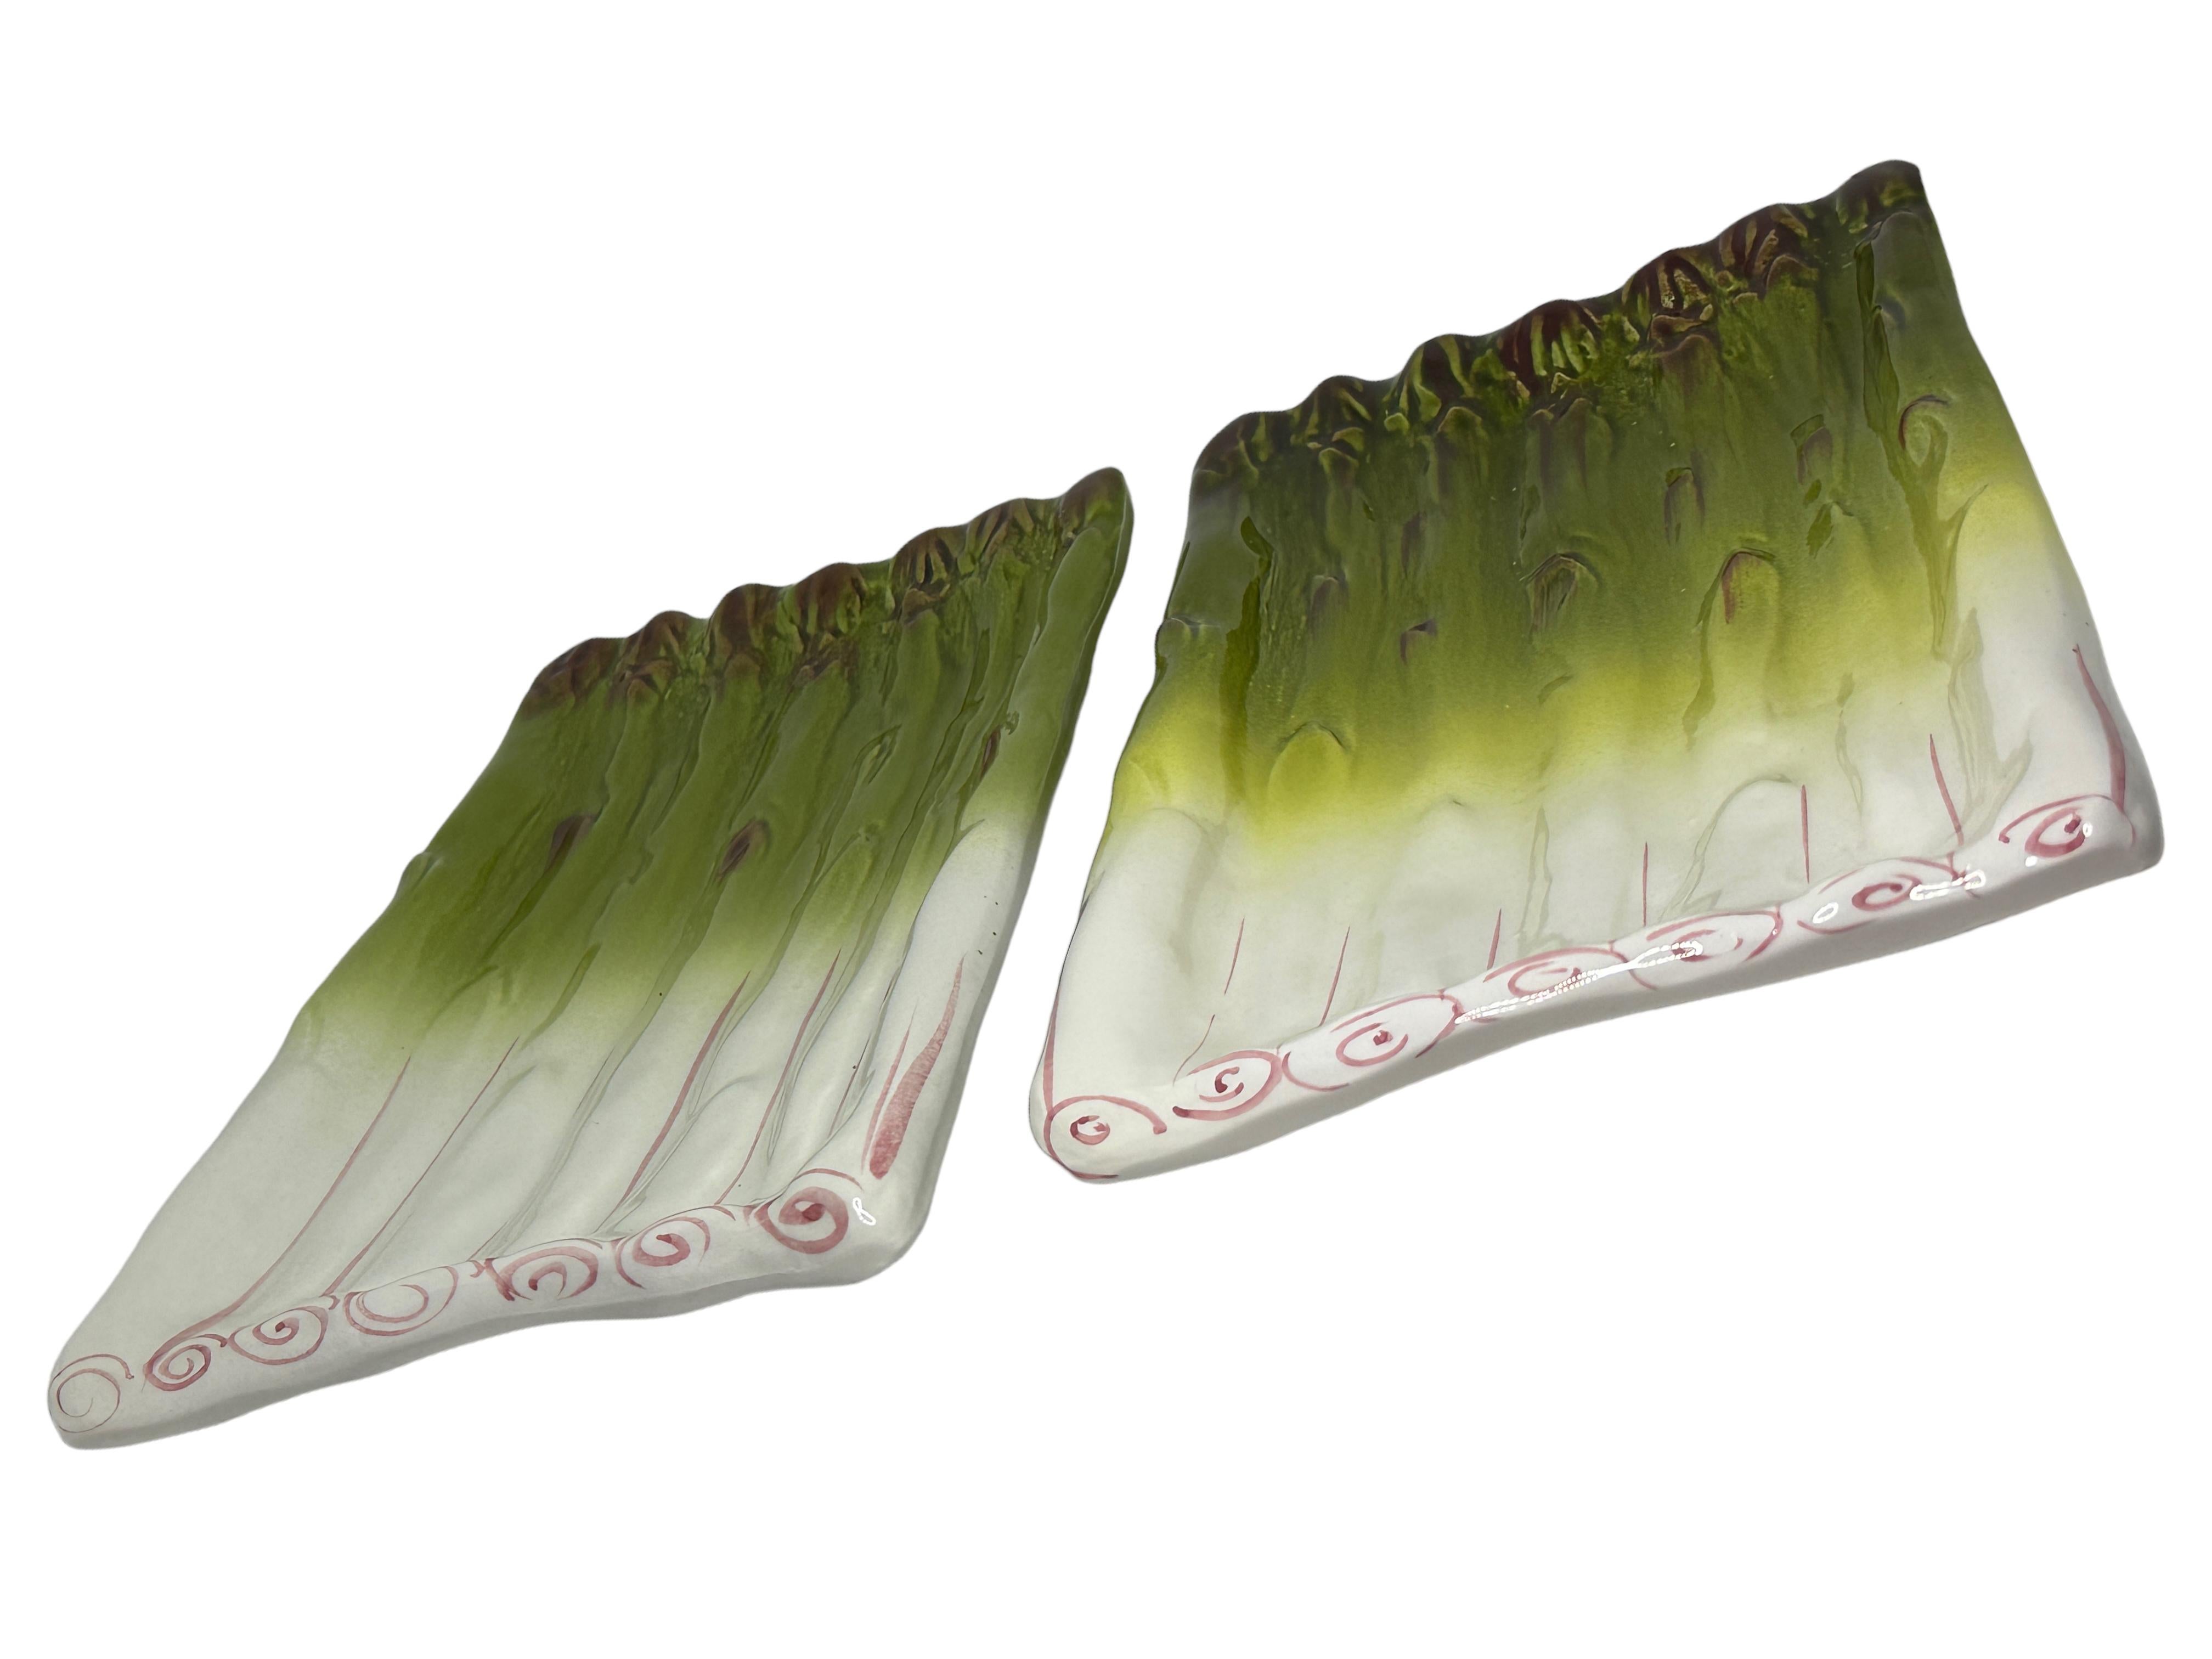 Vintage Ceramic Faience Majolica Asparagus Set of Six Plates, Italy 1980s For Sale 1